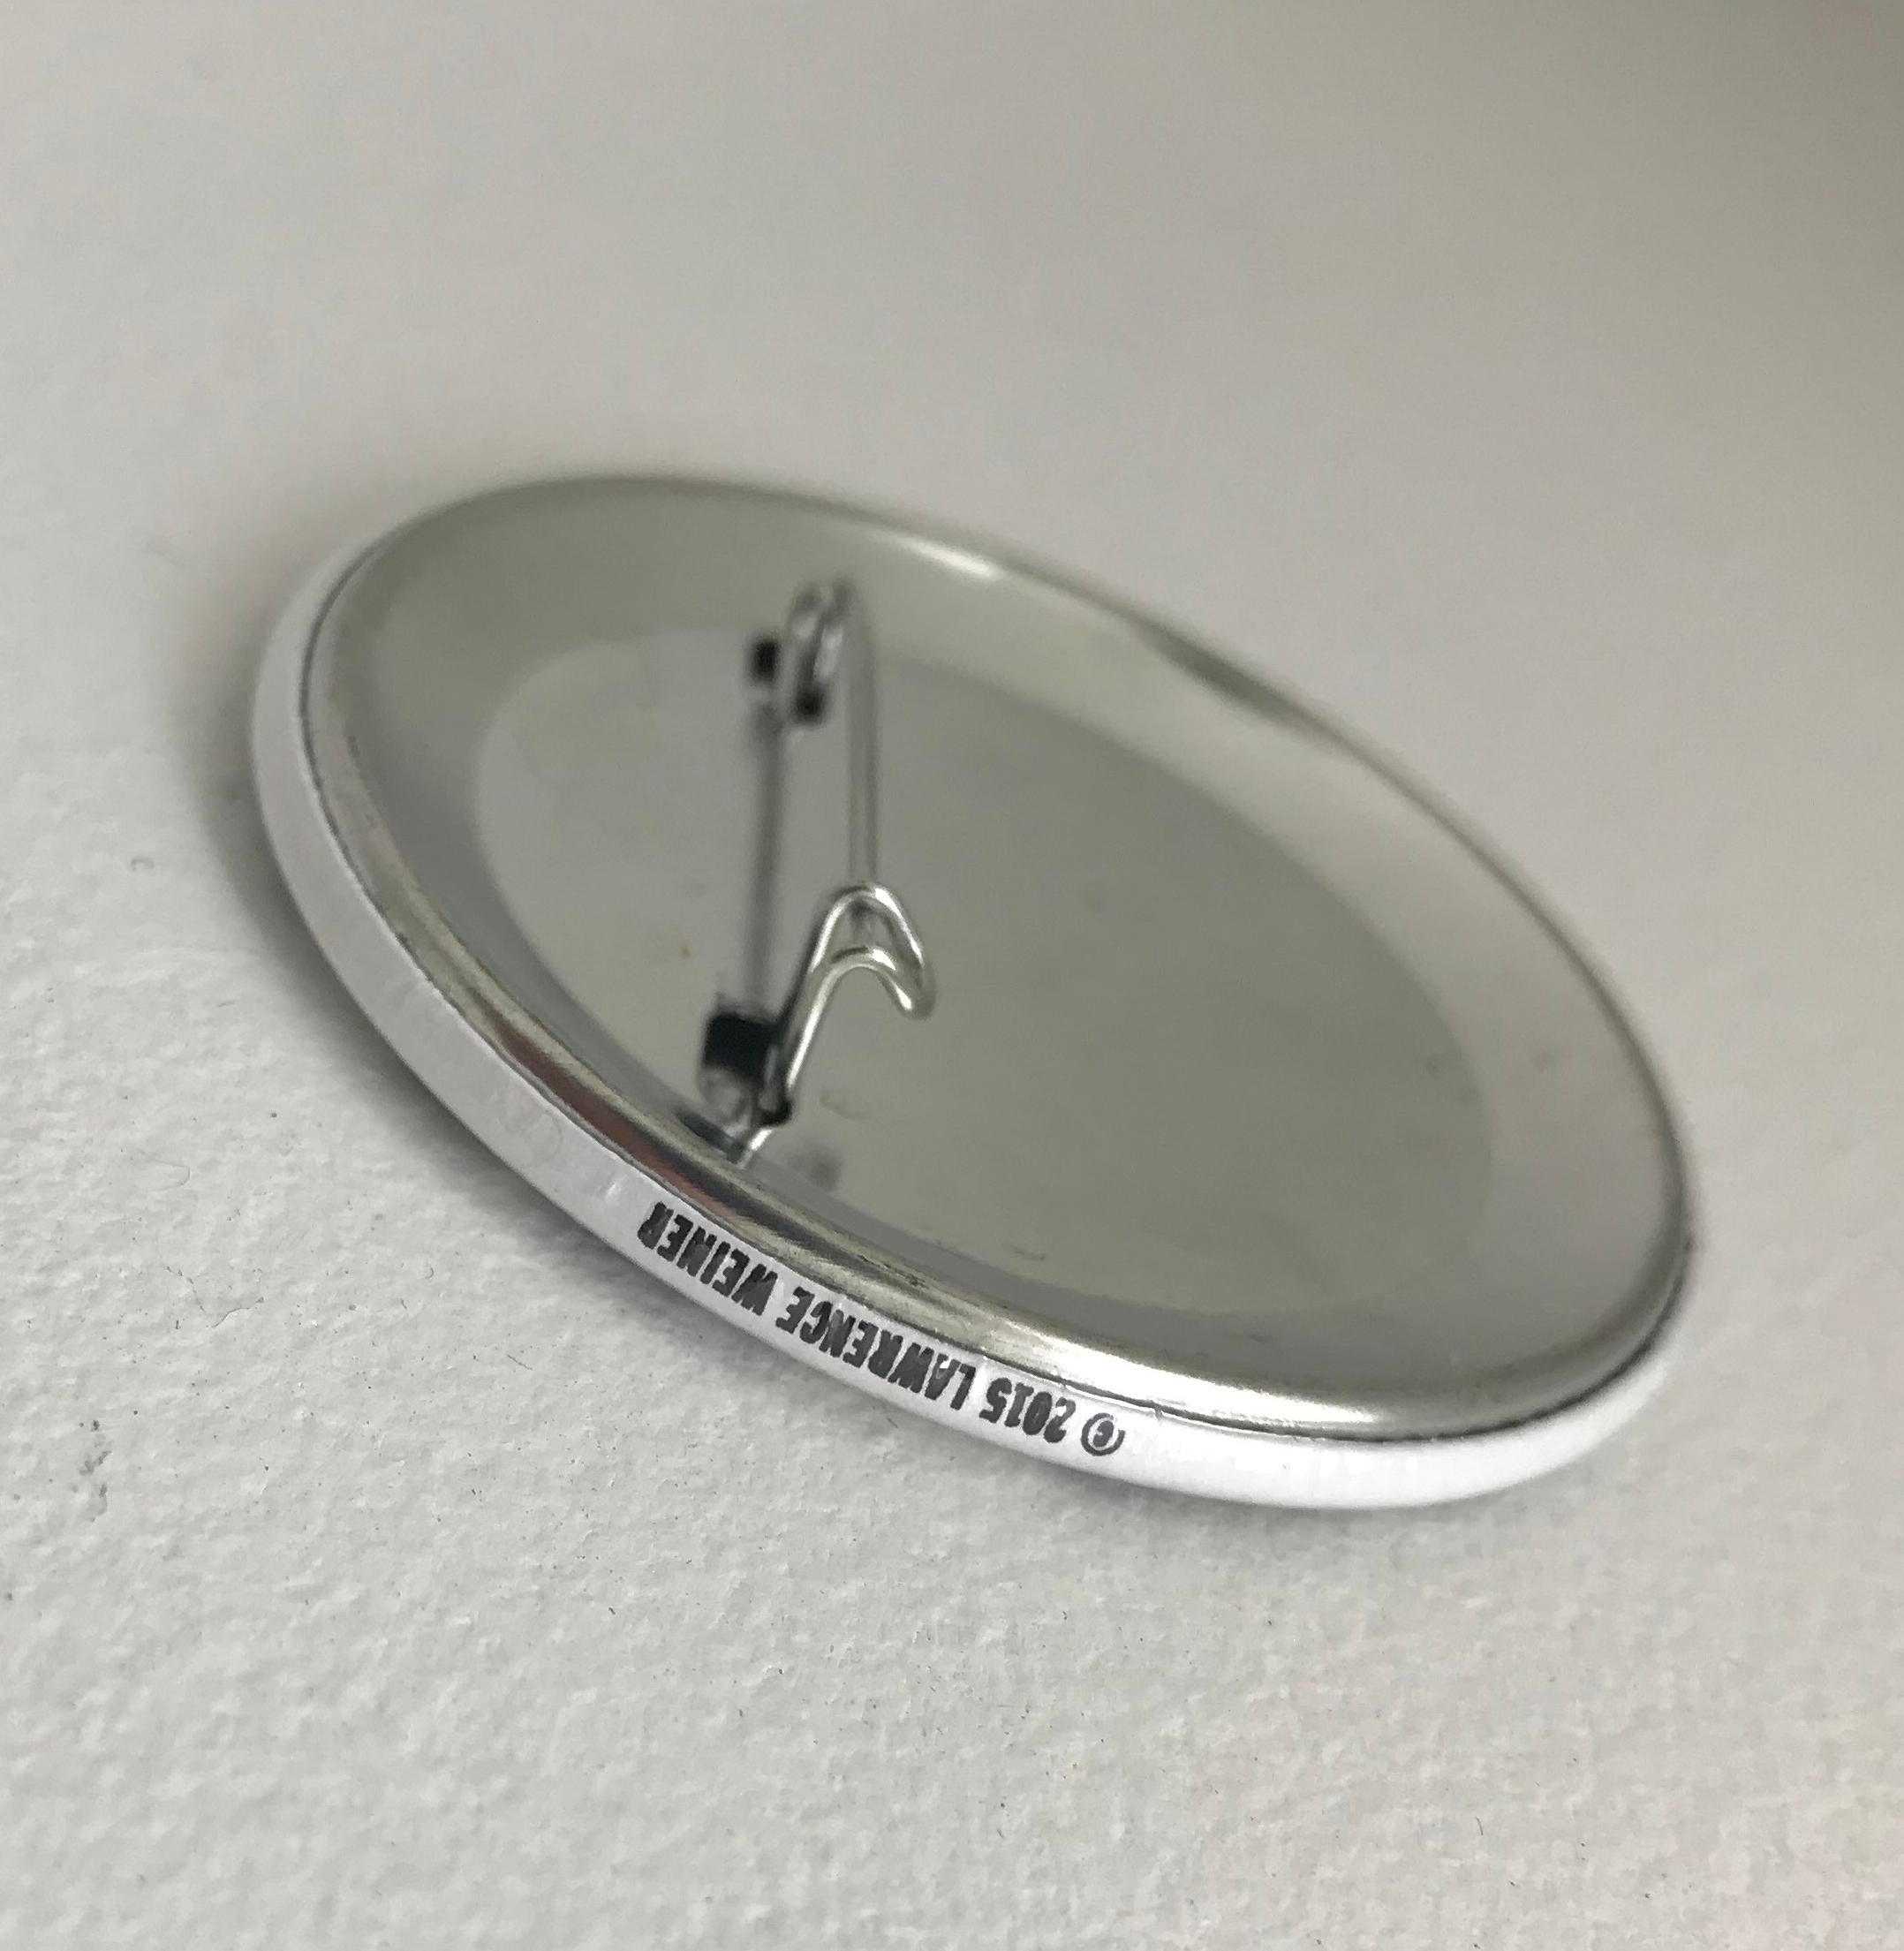 Lawrence Weiner button produced for the opening of the new Whitney Museum, 2015 For Sale 1